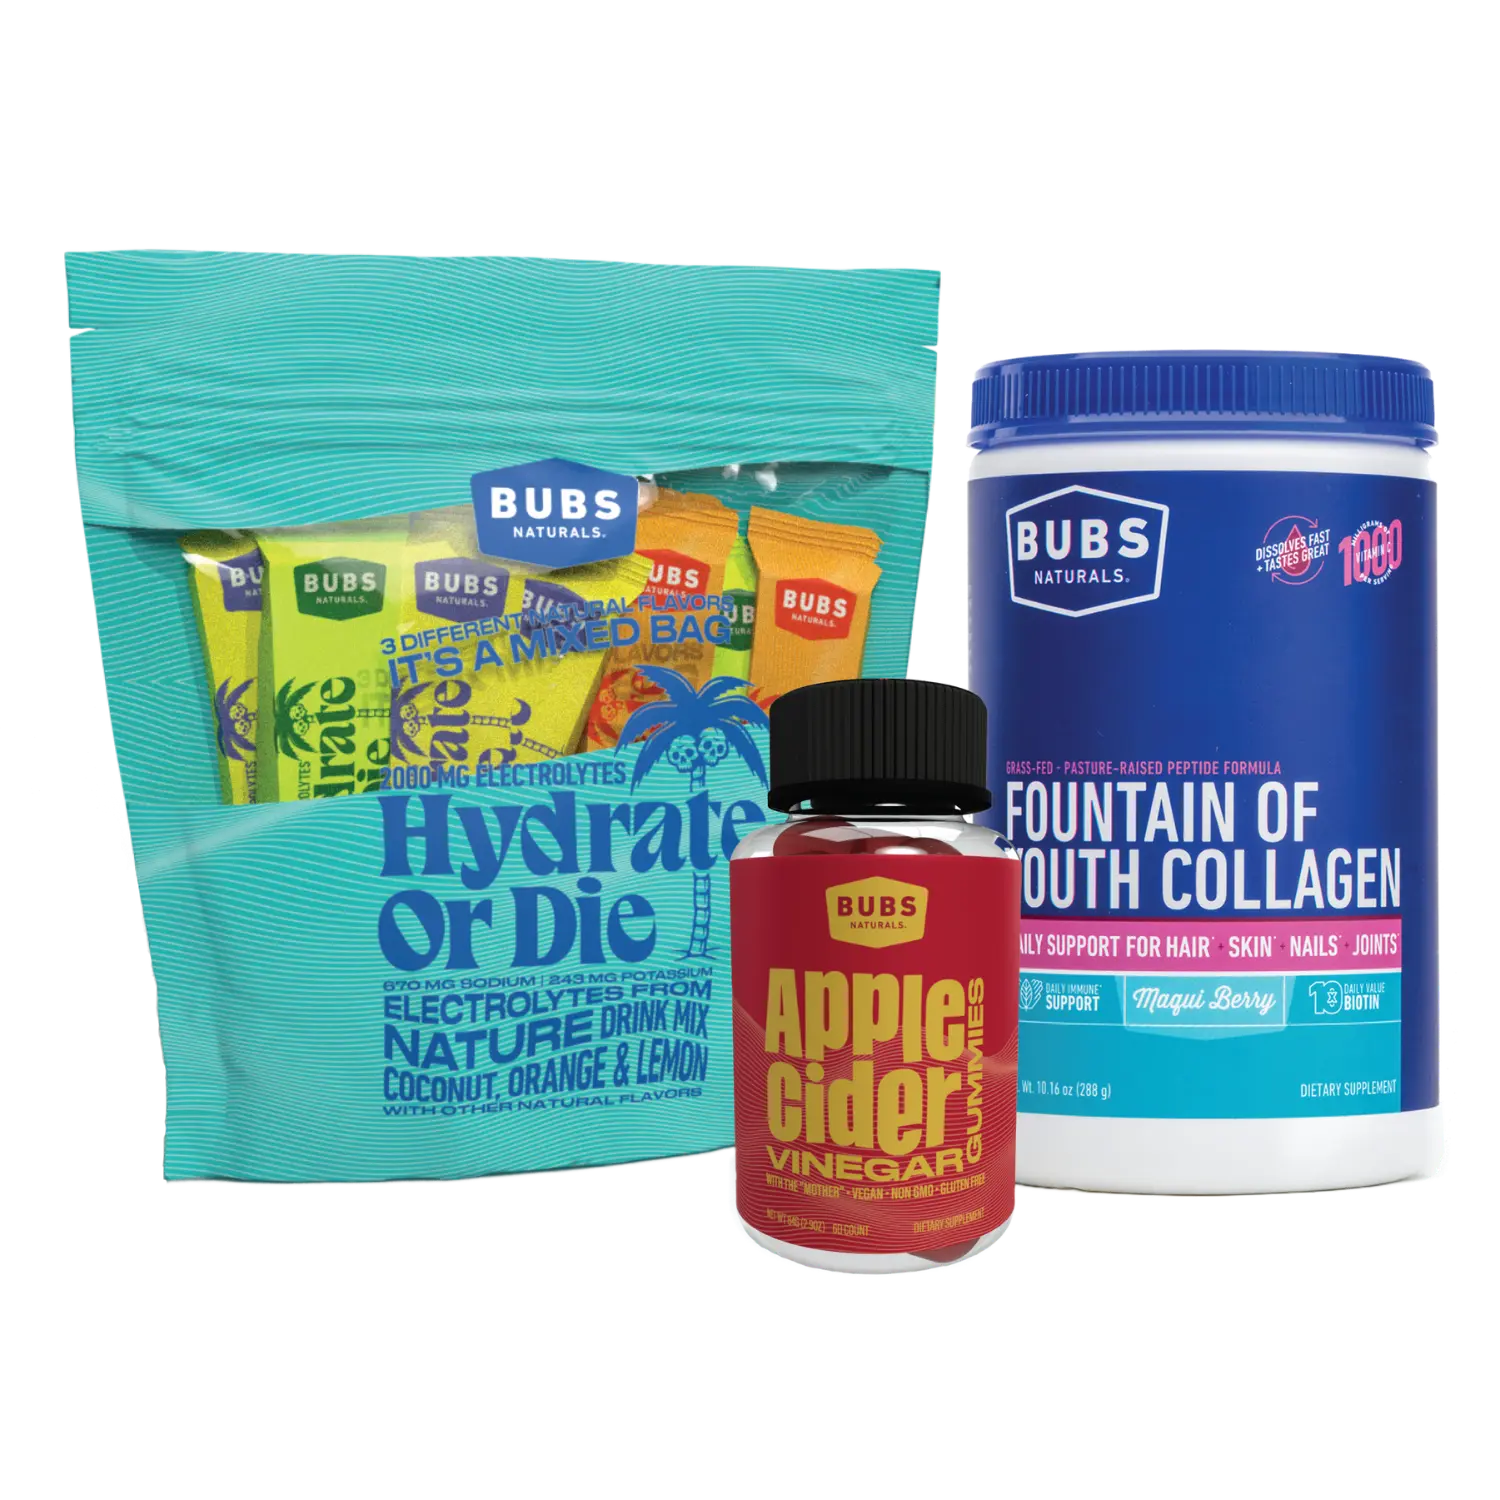 BUBS Naturals Glow Bundle with Mixed Hydrate or Die Bag, Apple Cider Vinegar Gummies, and Fountain of Youth Collagen